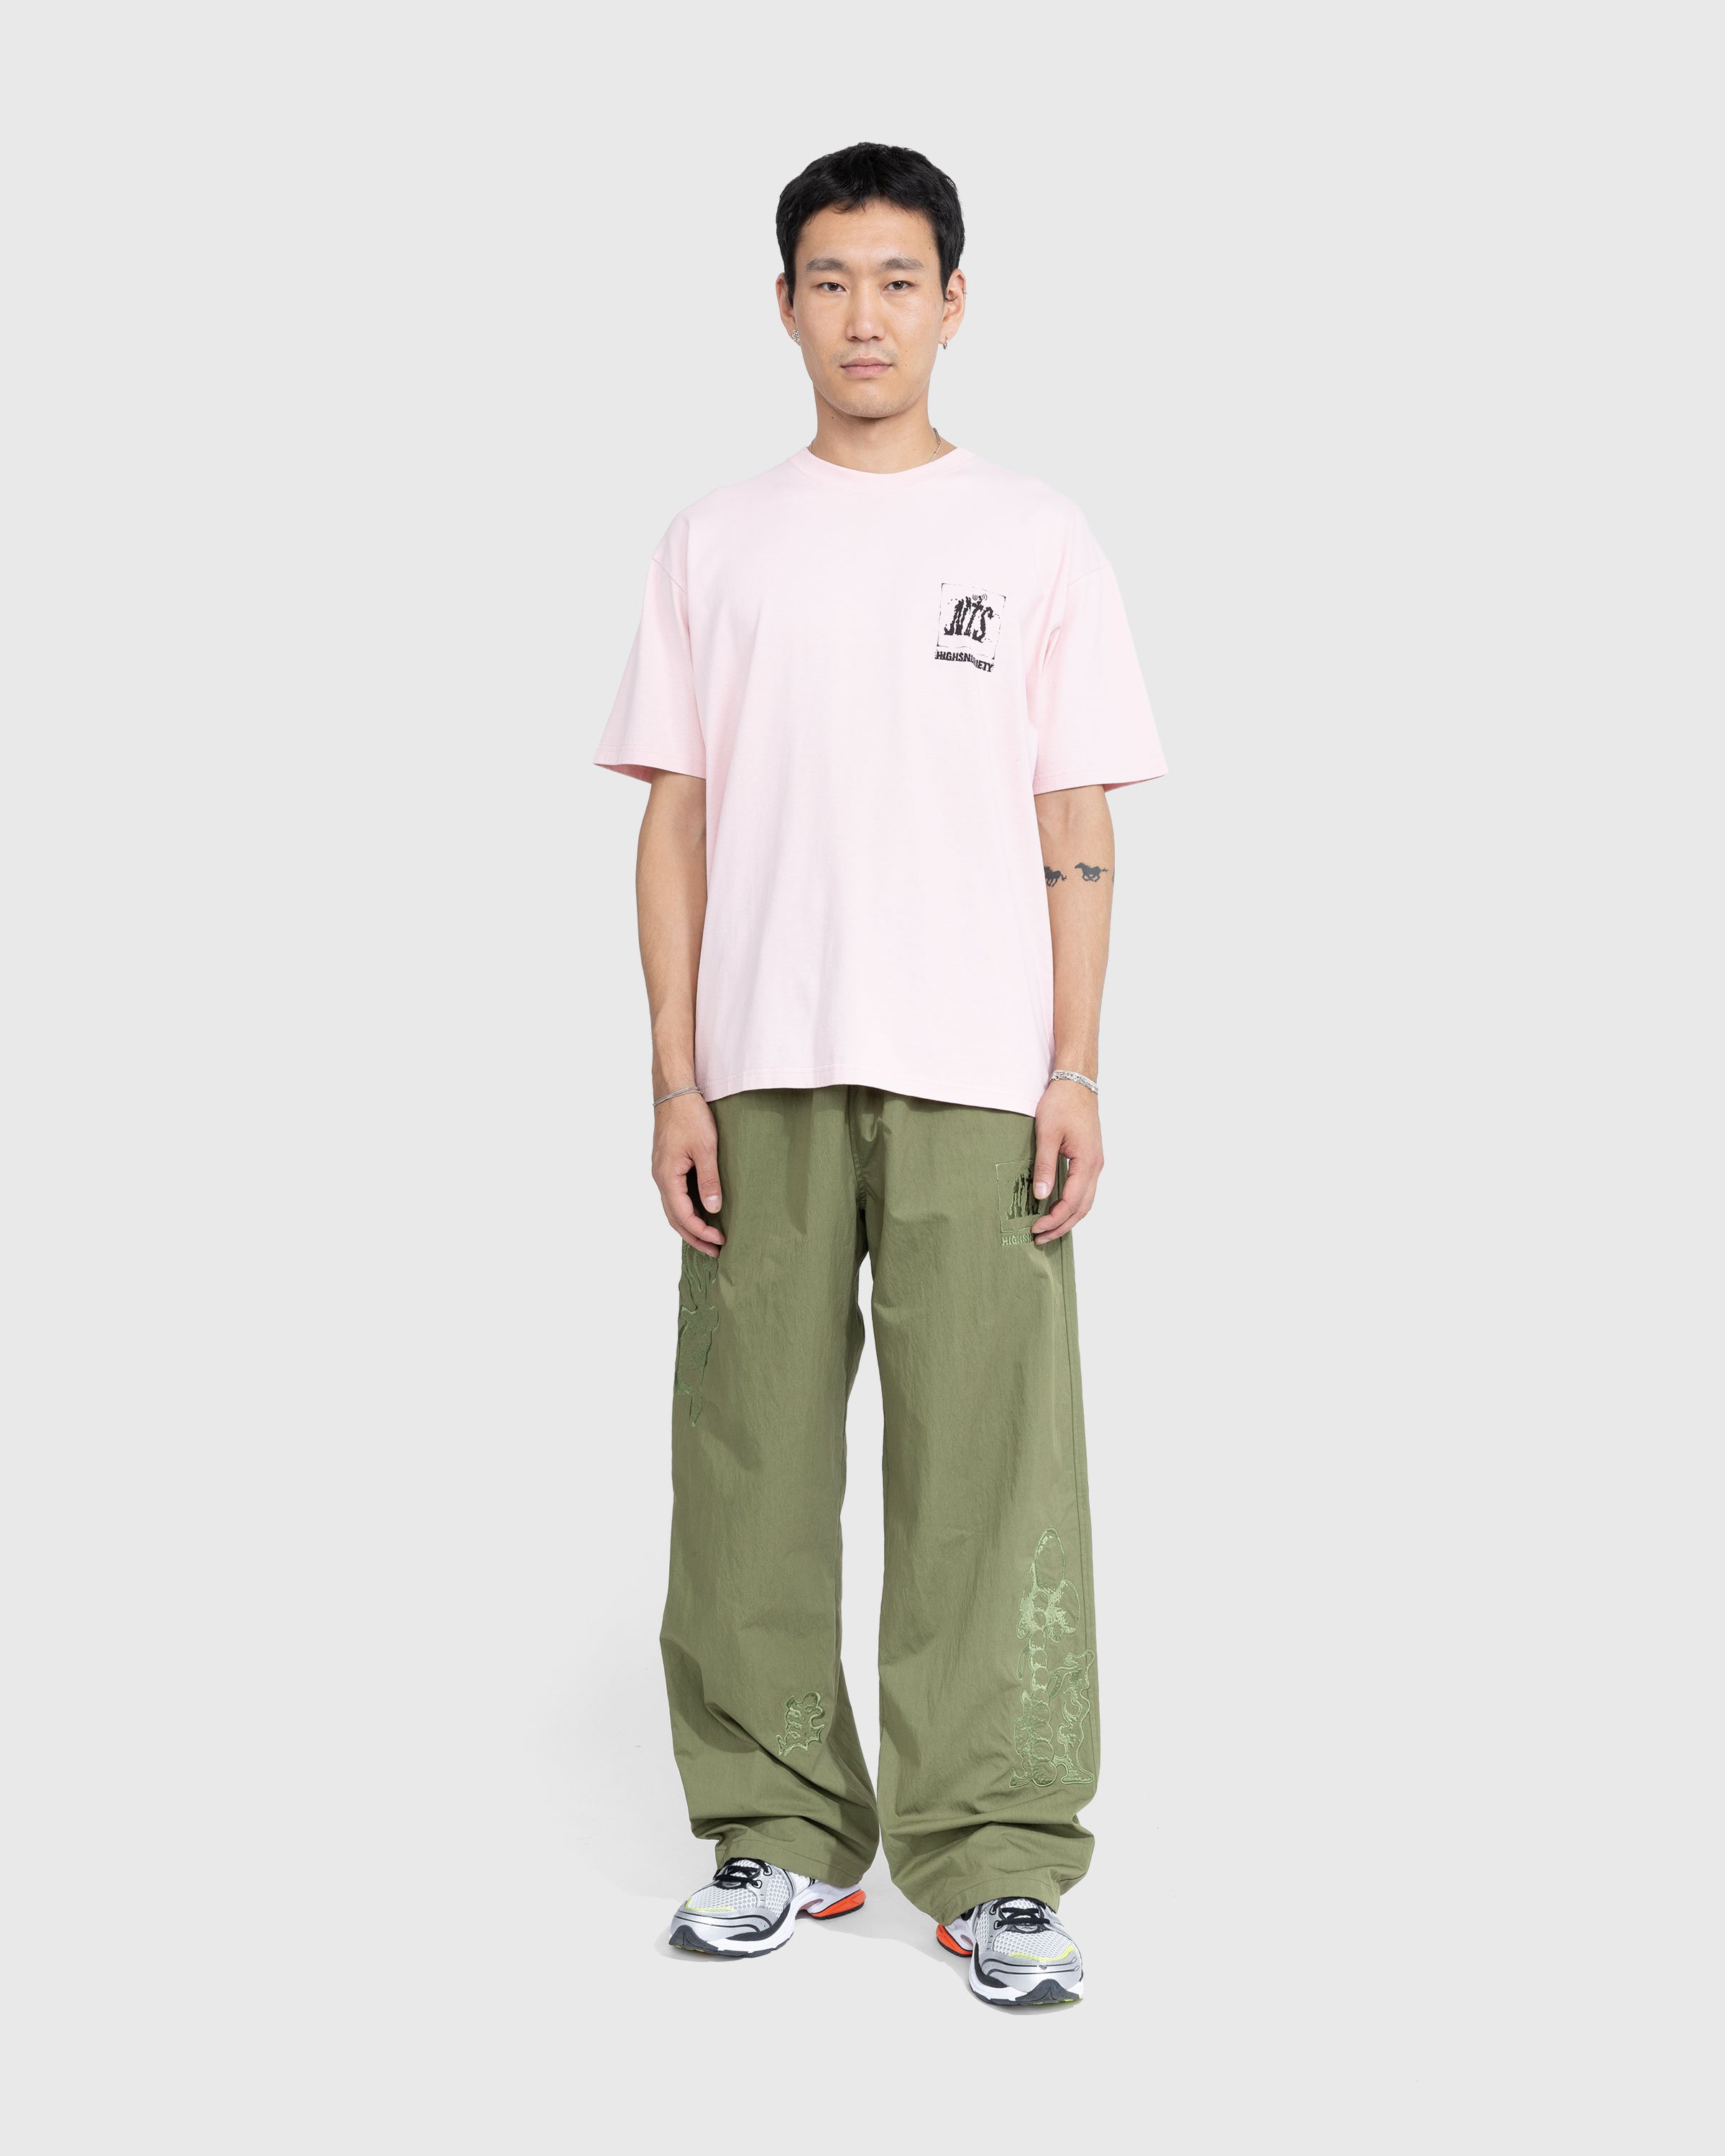 NTS x Highsnobiety - Graphic T-Shirt Pink - Clothing - Pink - Image 5